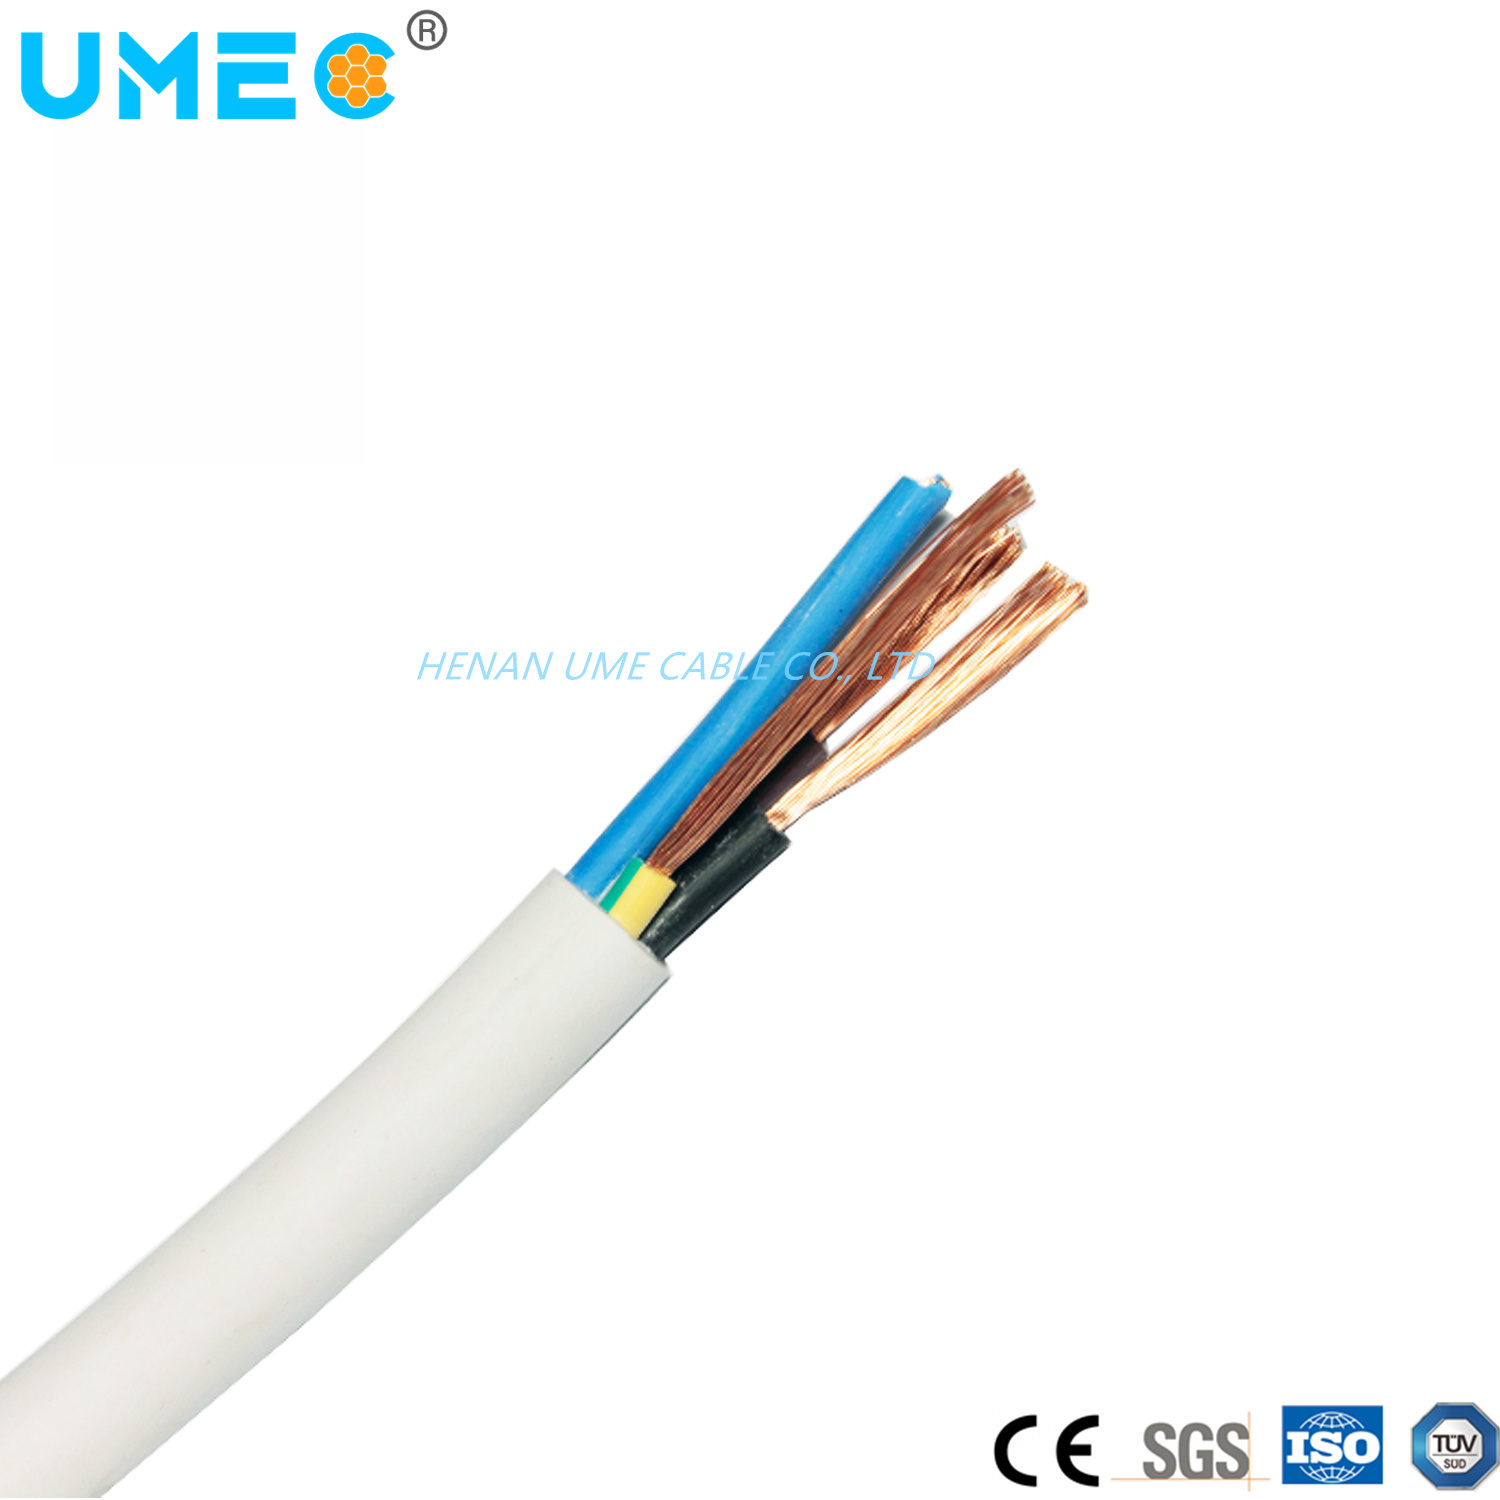 Liycy 6X0.5mm CCA PVC Insulated Sheathed Liycy Cable